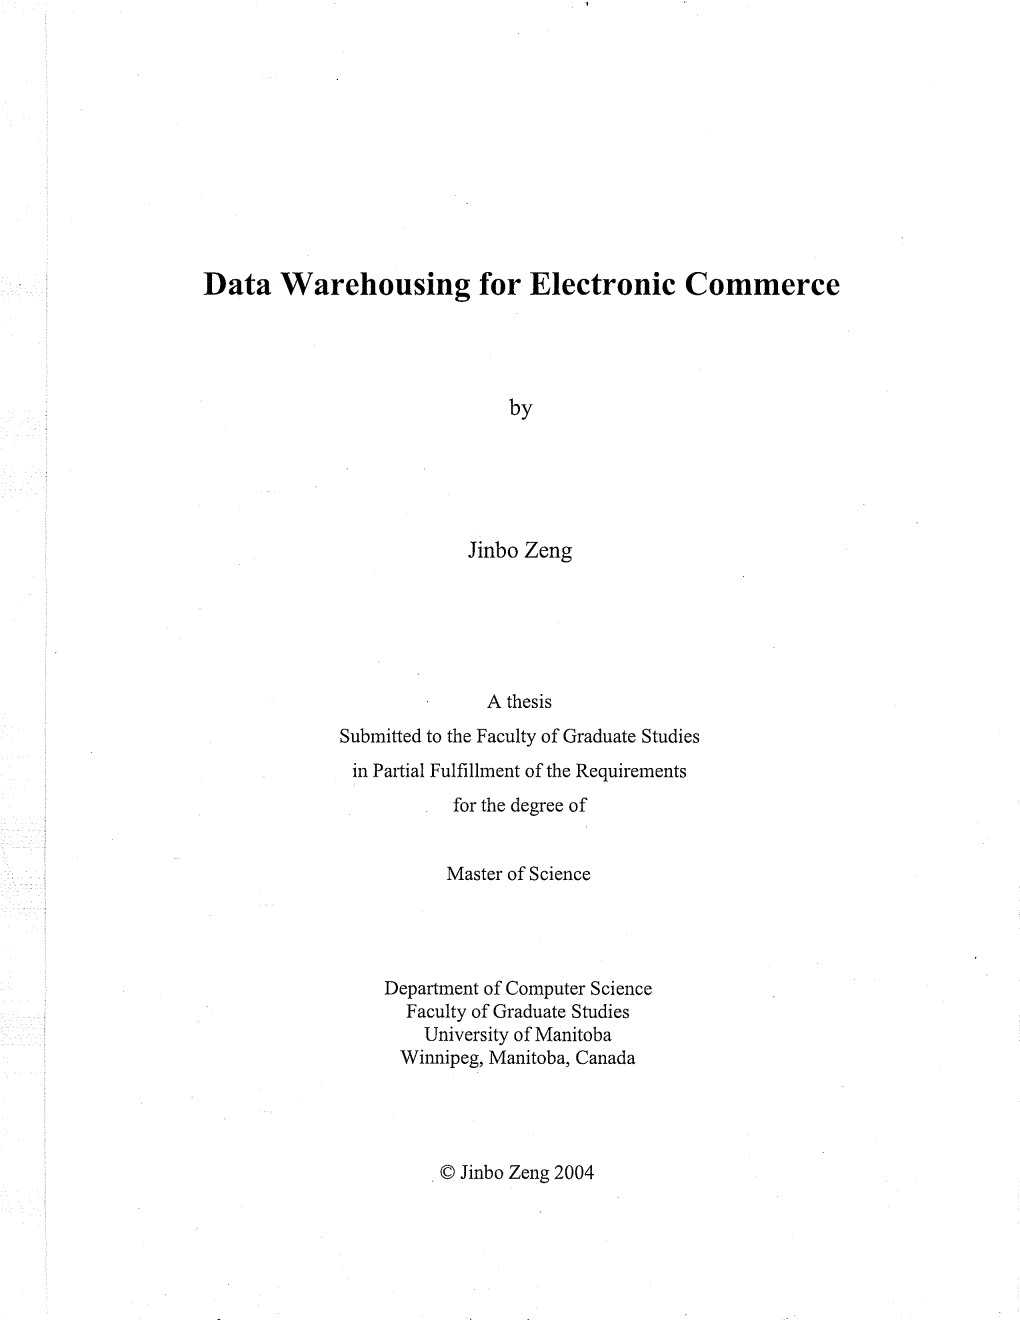 Data Warehousing for Electronic Commerce